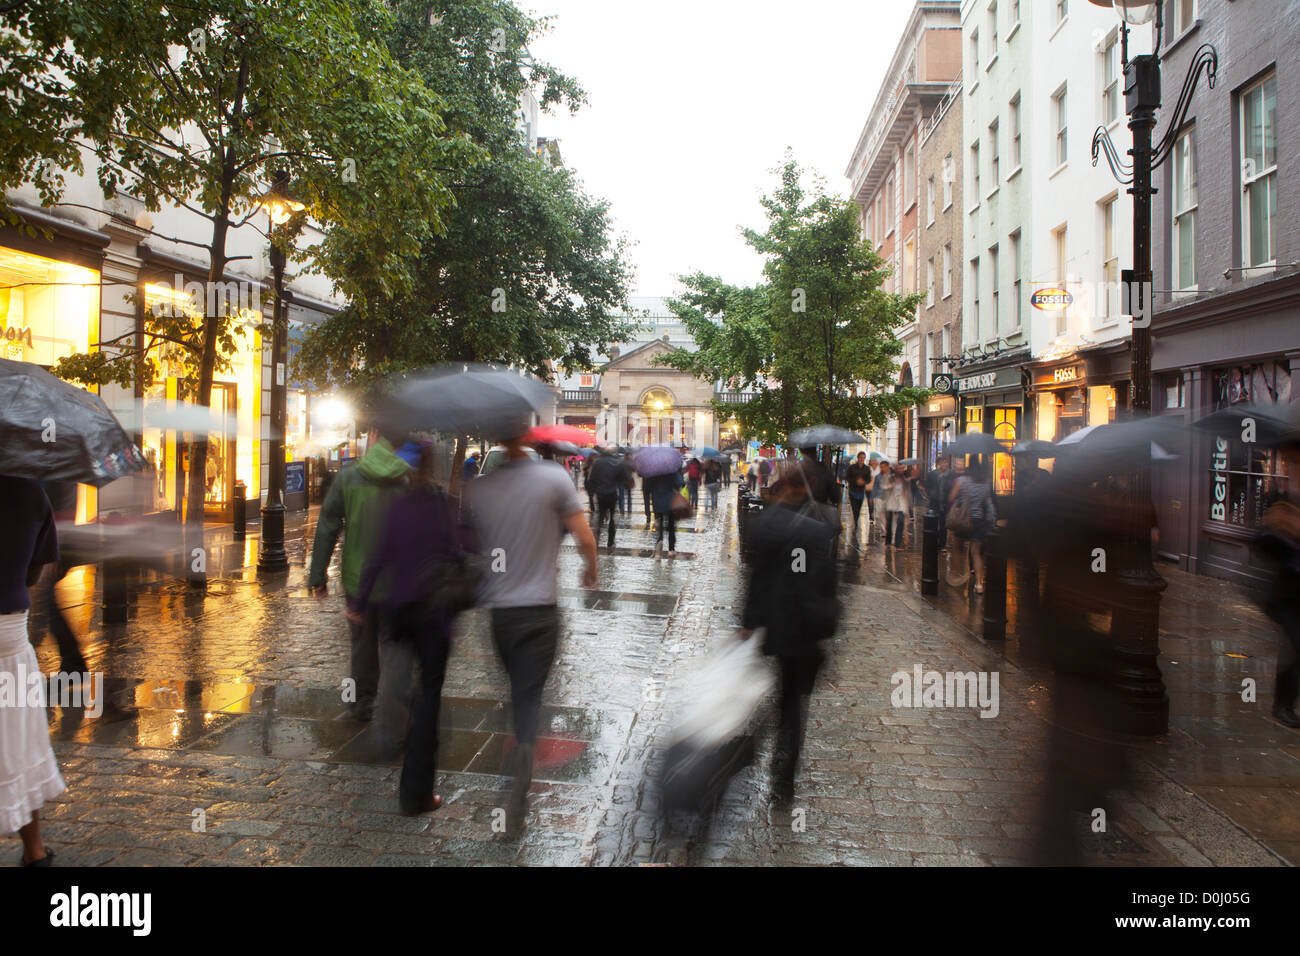 A view of people walking in the rain around Covent Garden. Stock Photo